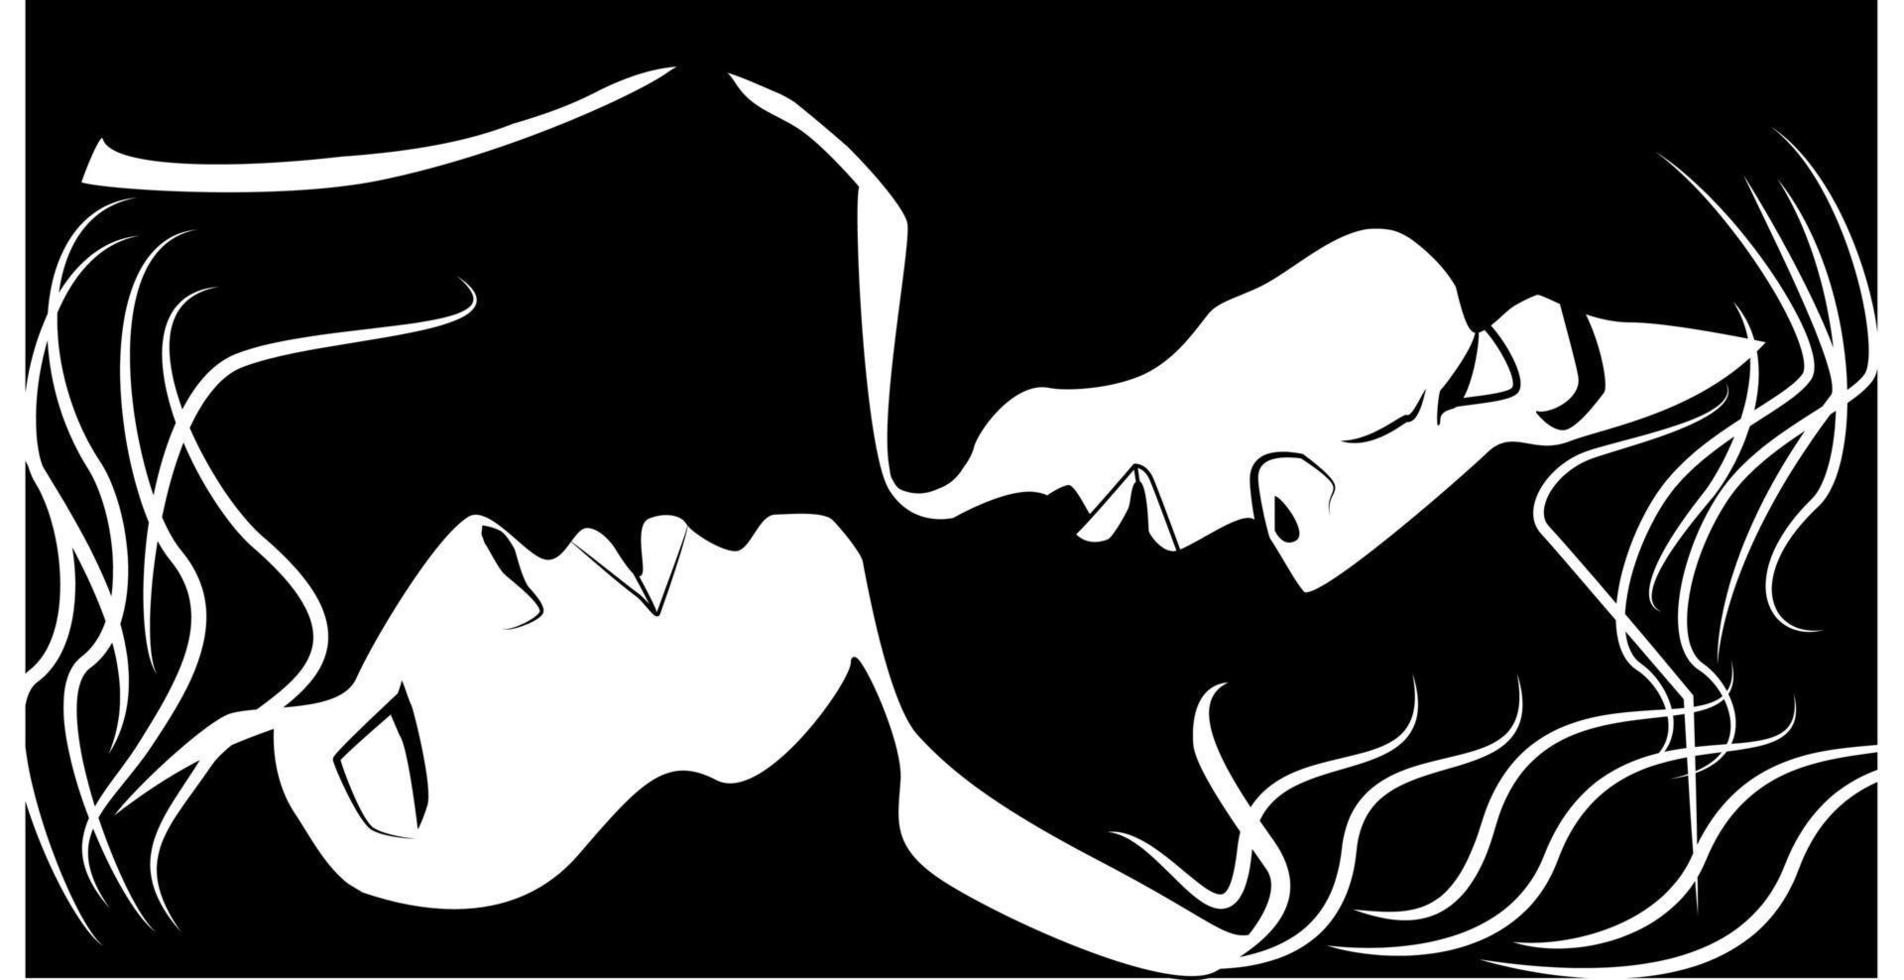 Vector Illustration Of Two People In Intimate Position